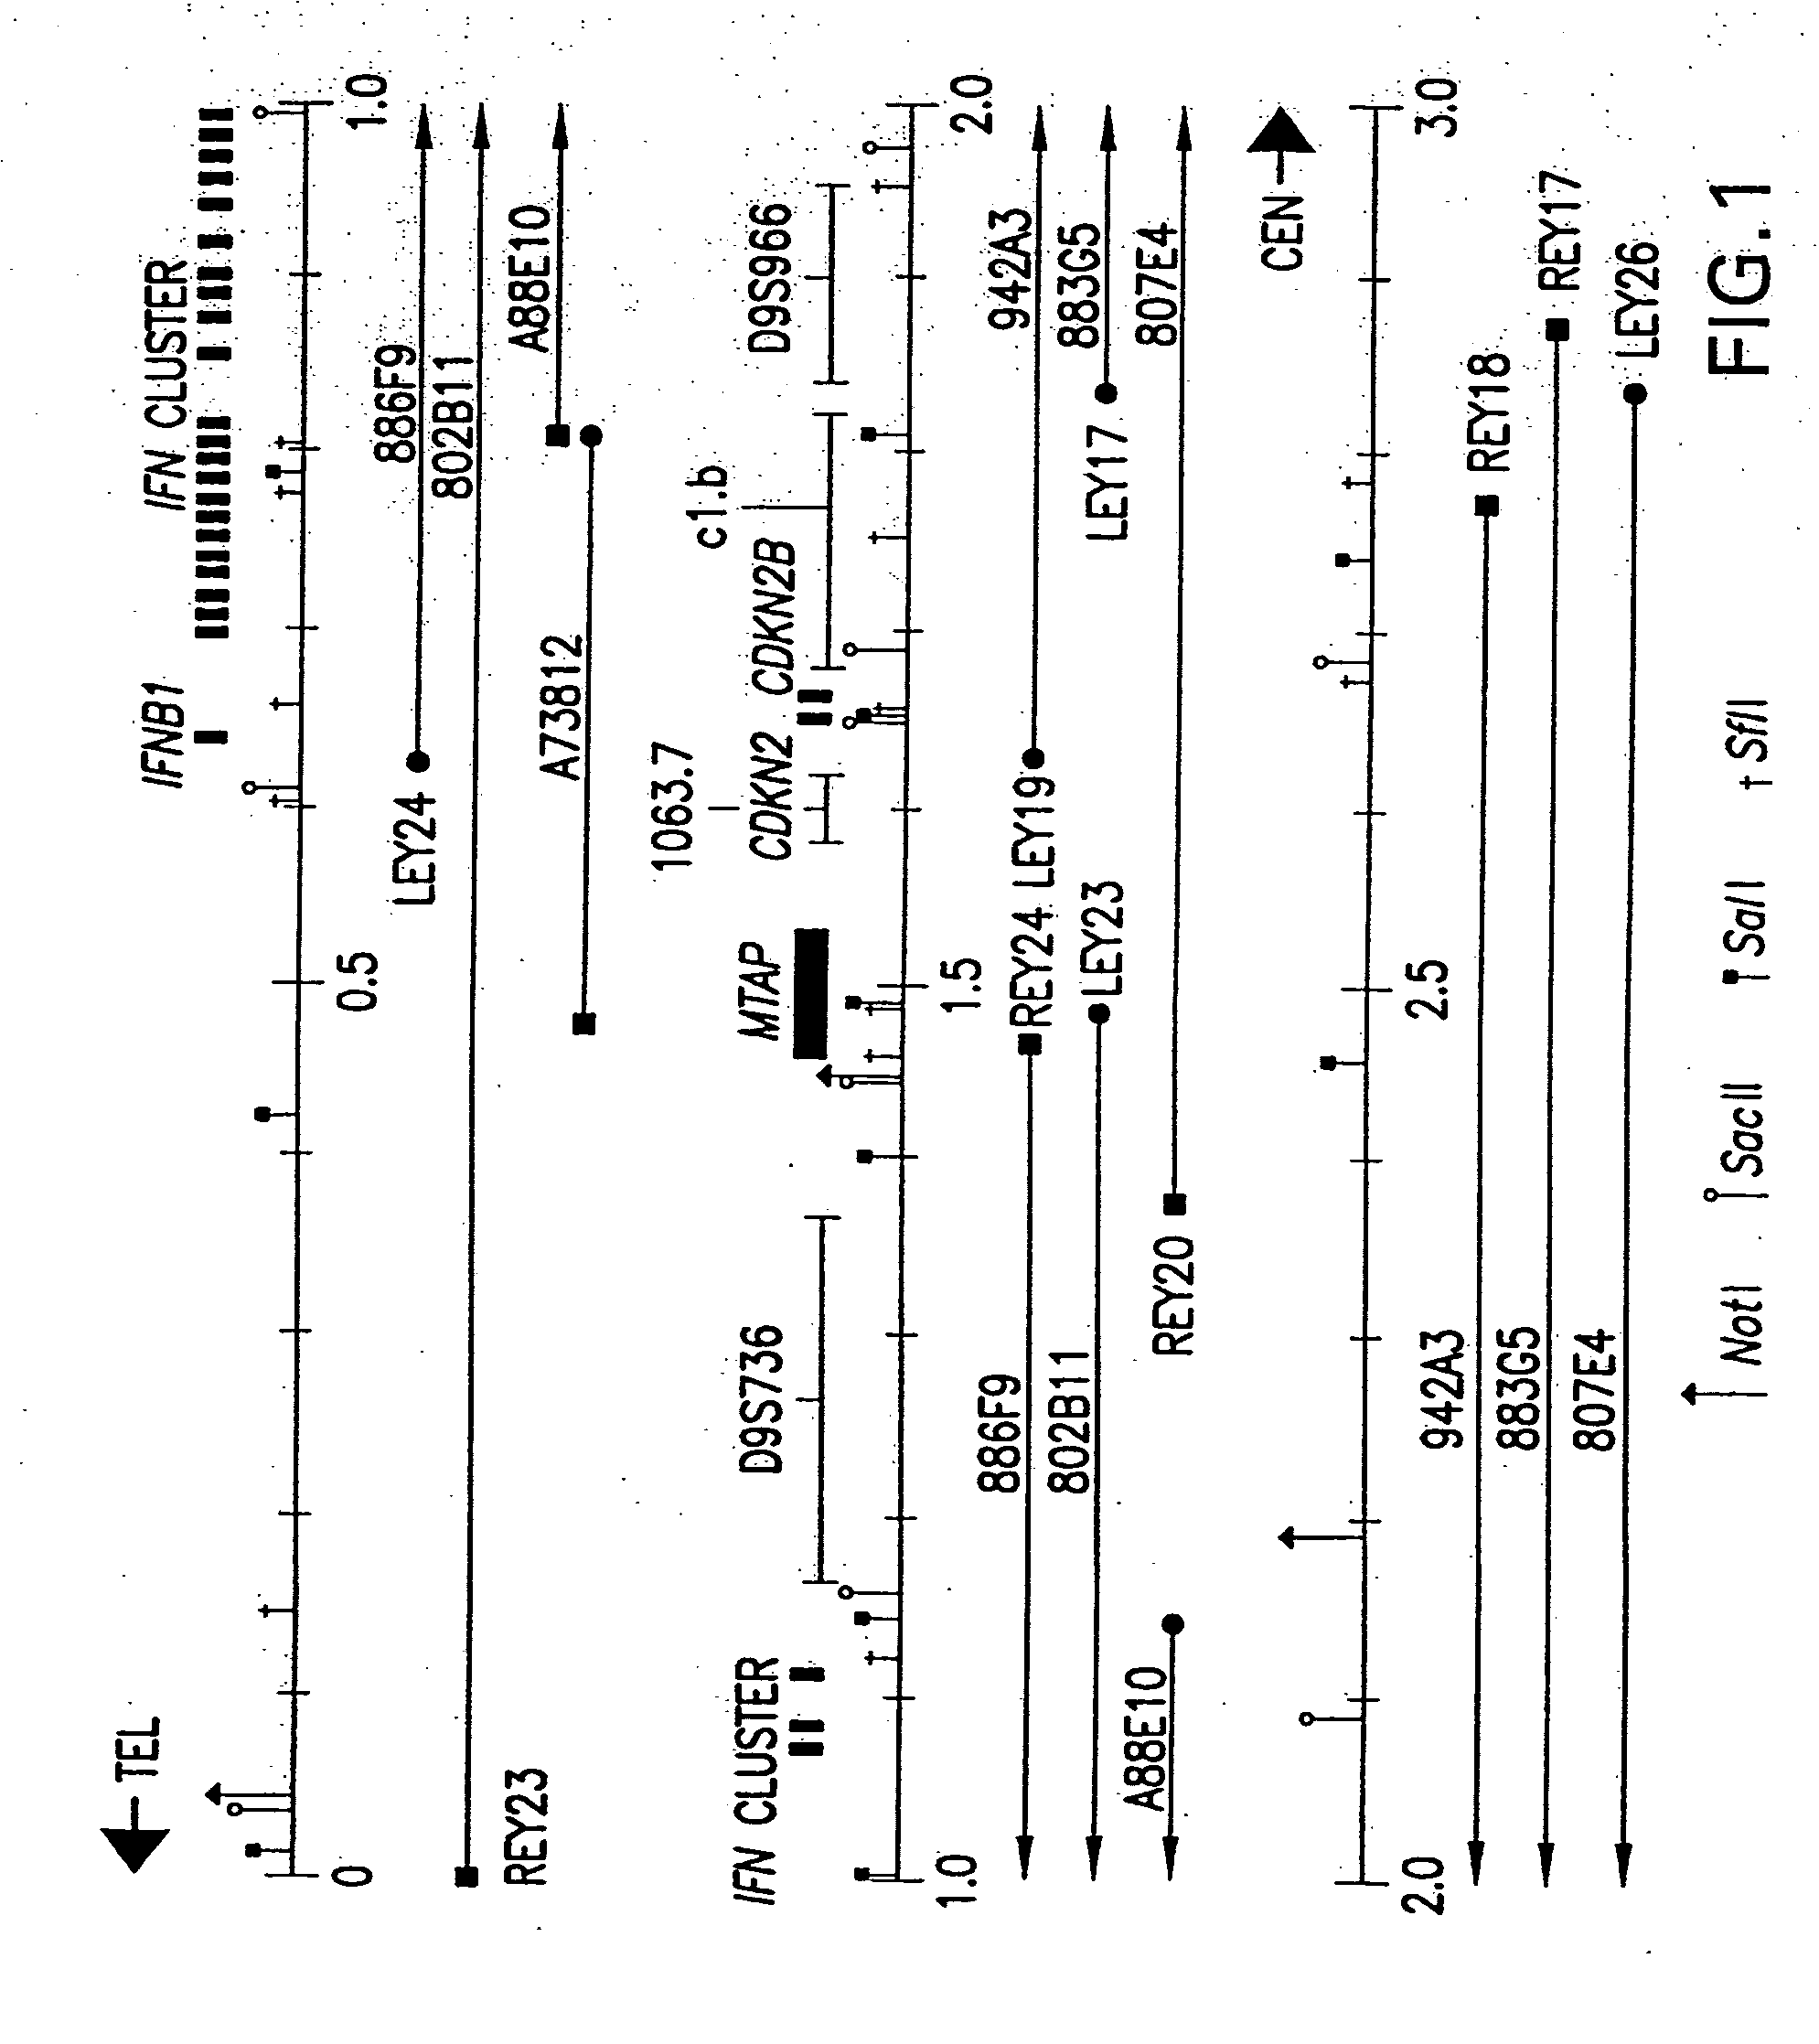 Methylthioadenosine phosphorylase compositions and methods of use in the diagnosis and treatment of proliferative disorders